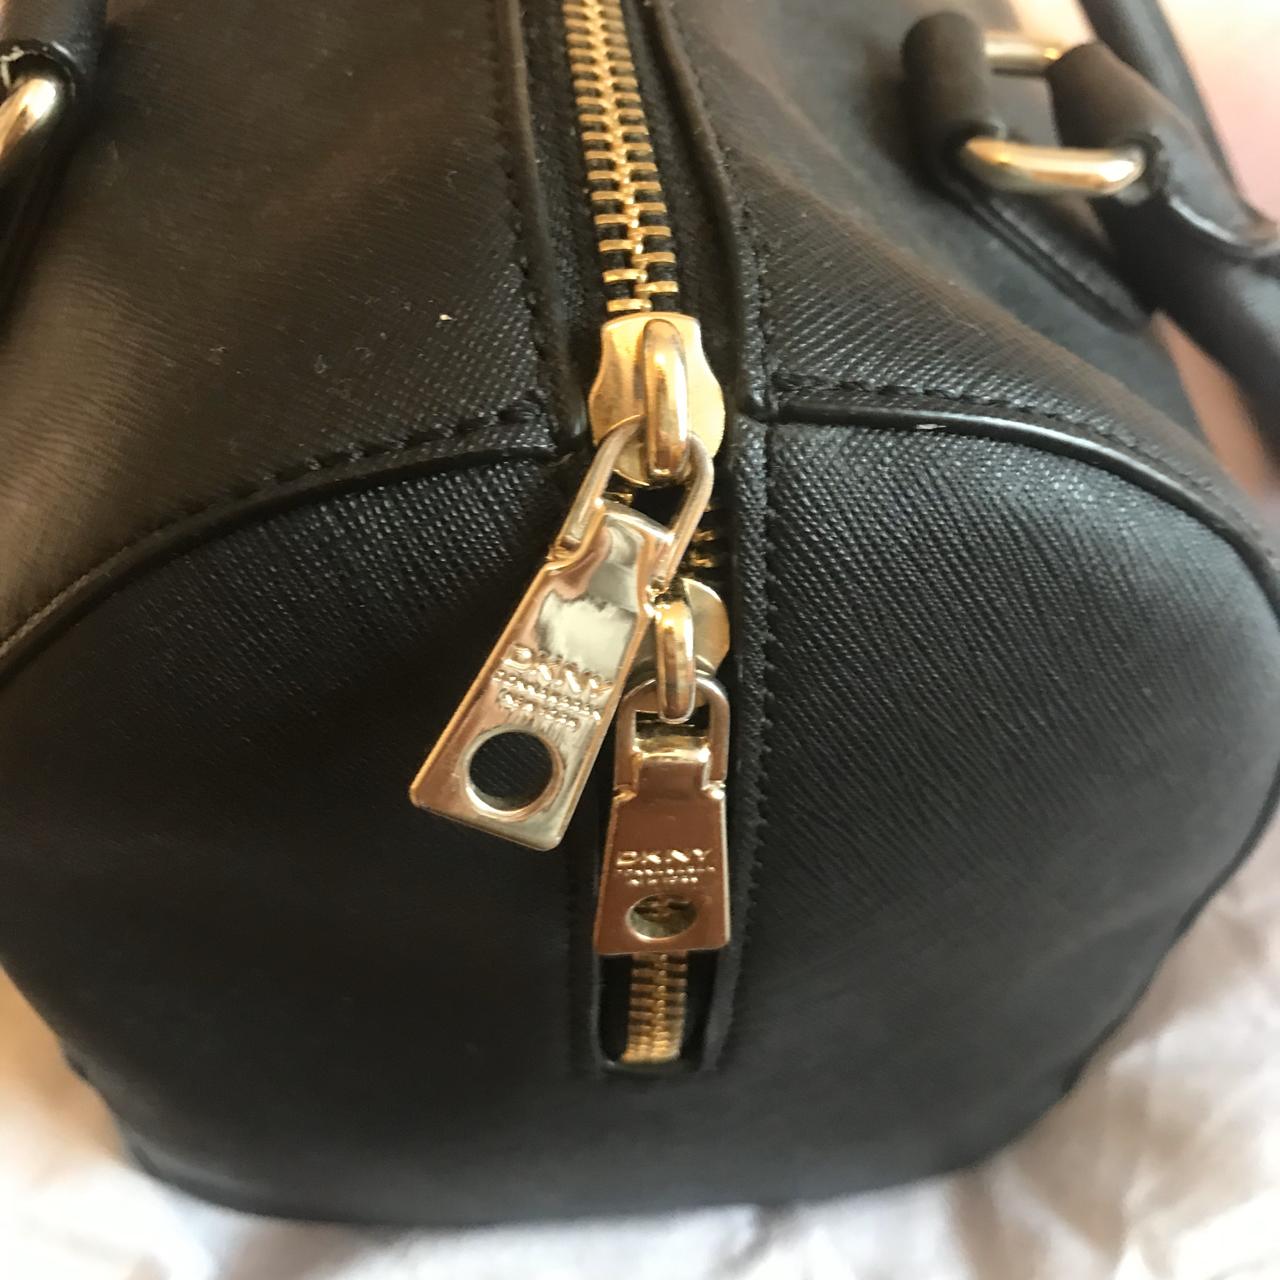 Authentic Hermes massai leather bag. Used in pretty - Depop